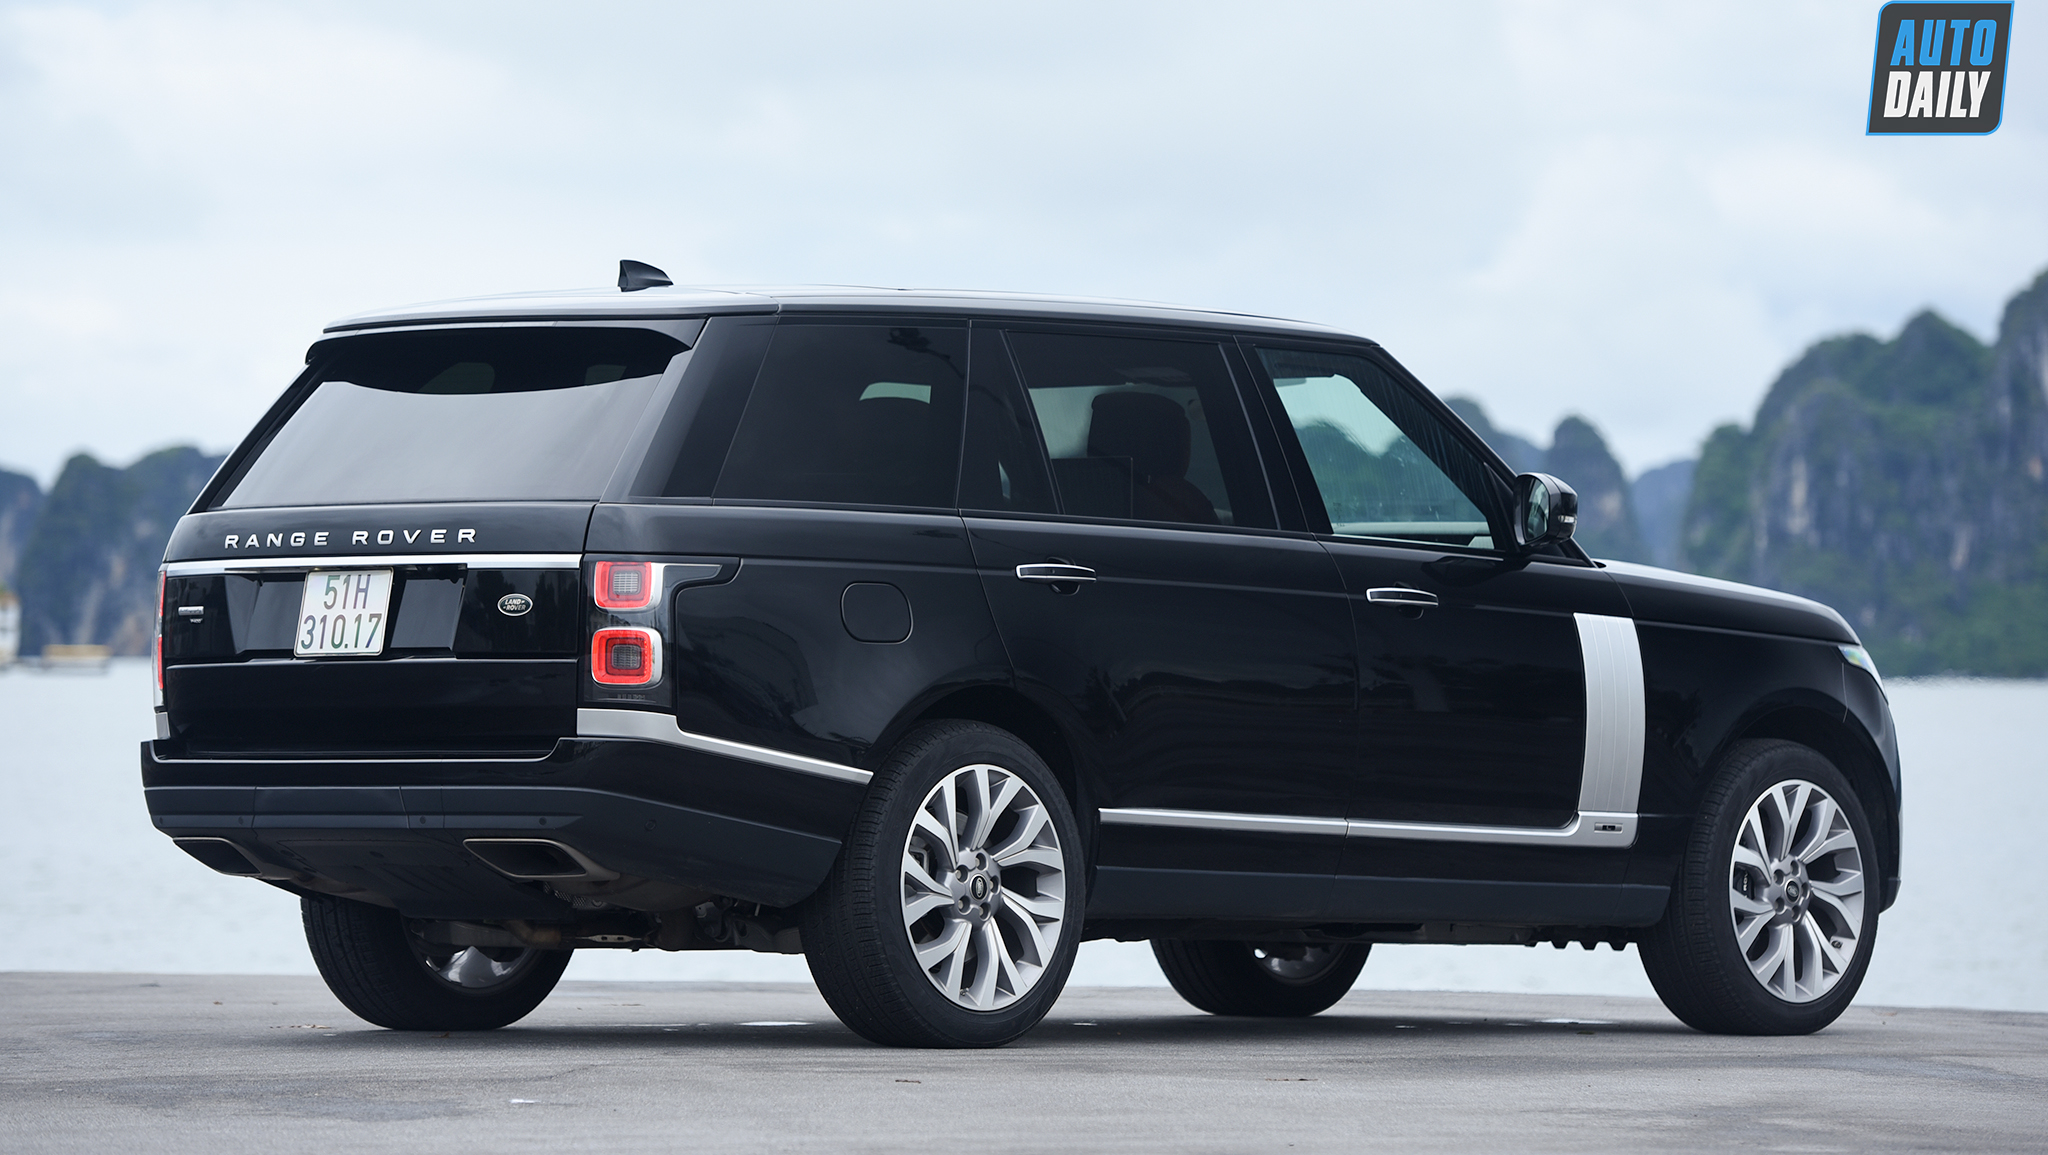 Used 2021 Land Rover Range Rover Autobiography LWB For Sale Sold   Mclaren Boston Stock 427413